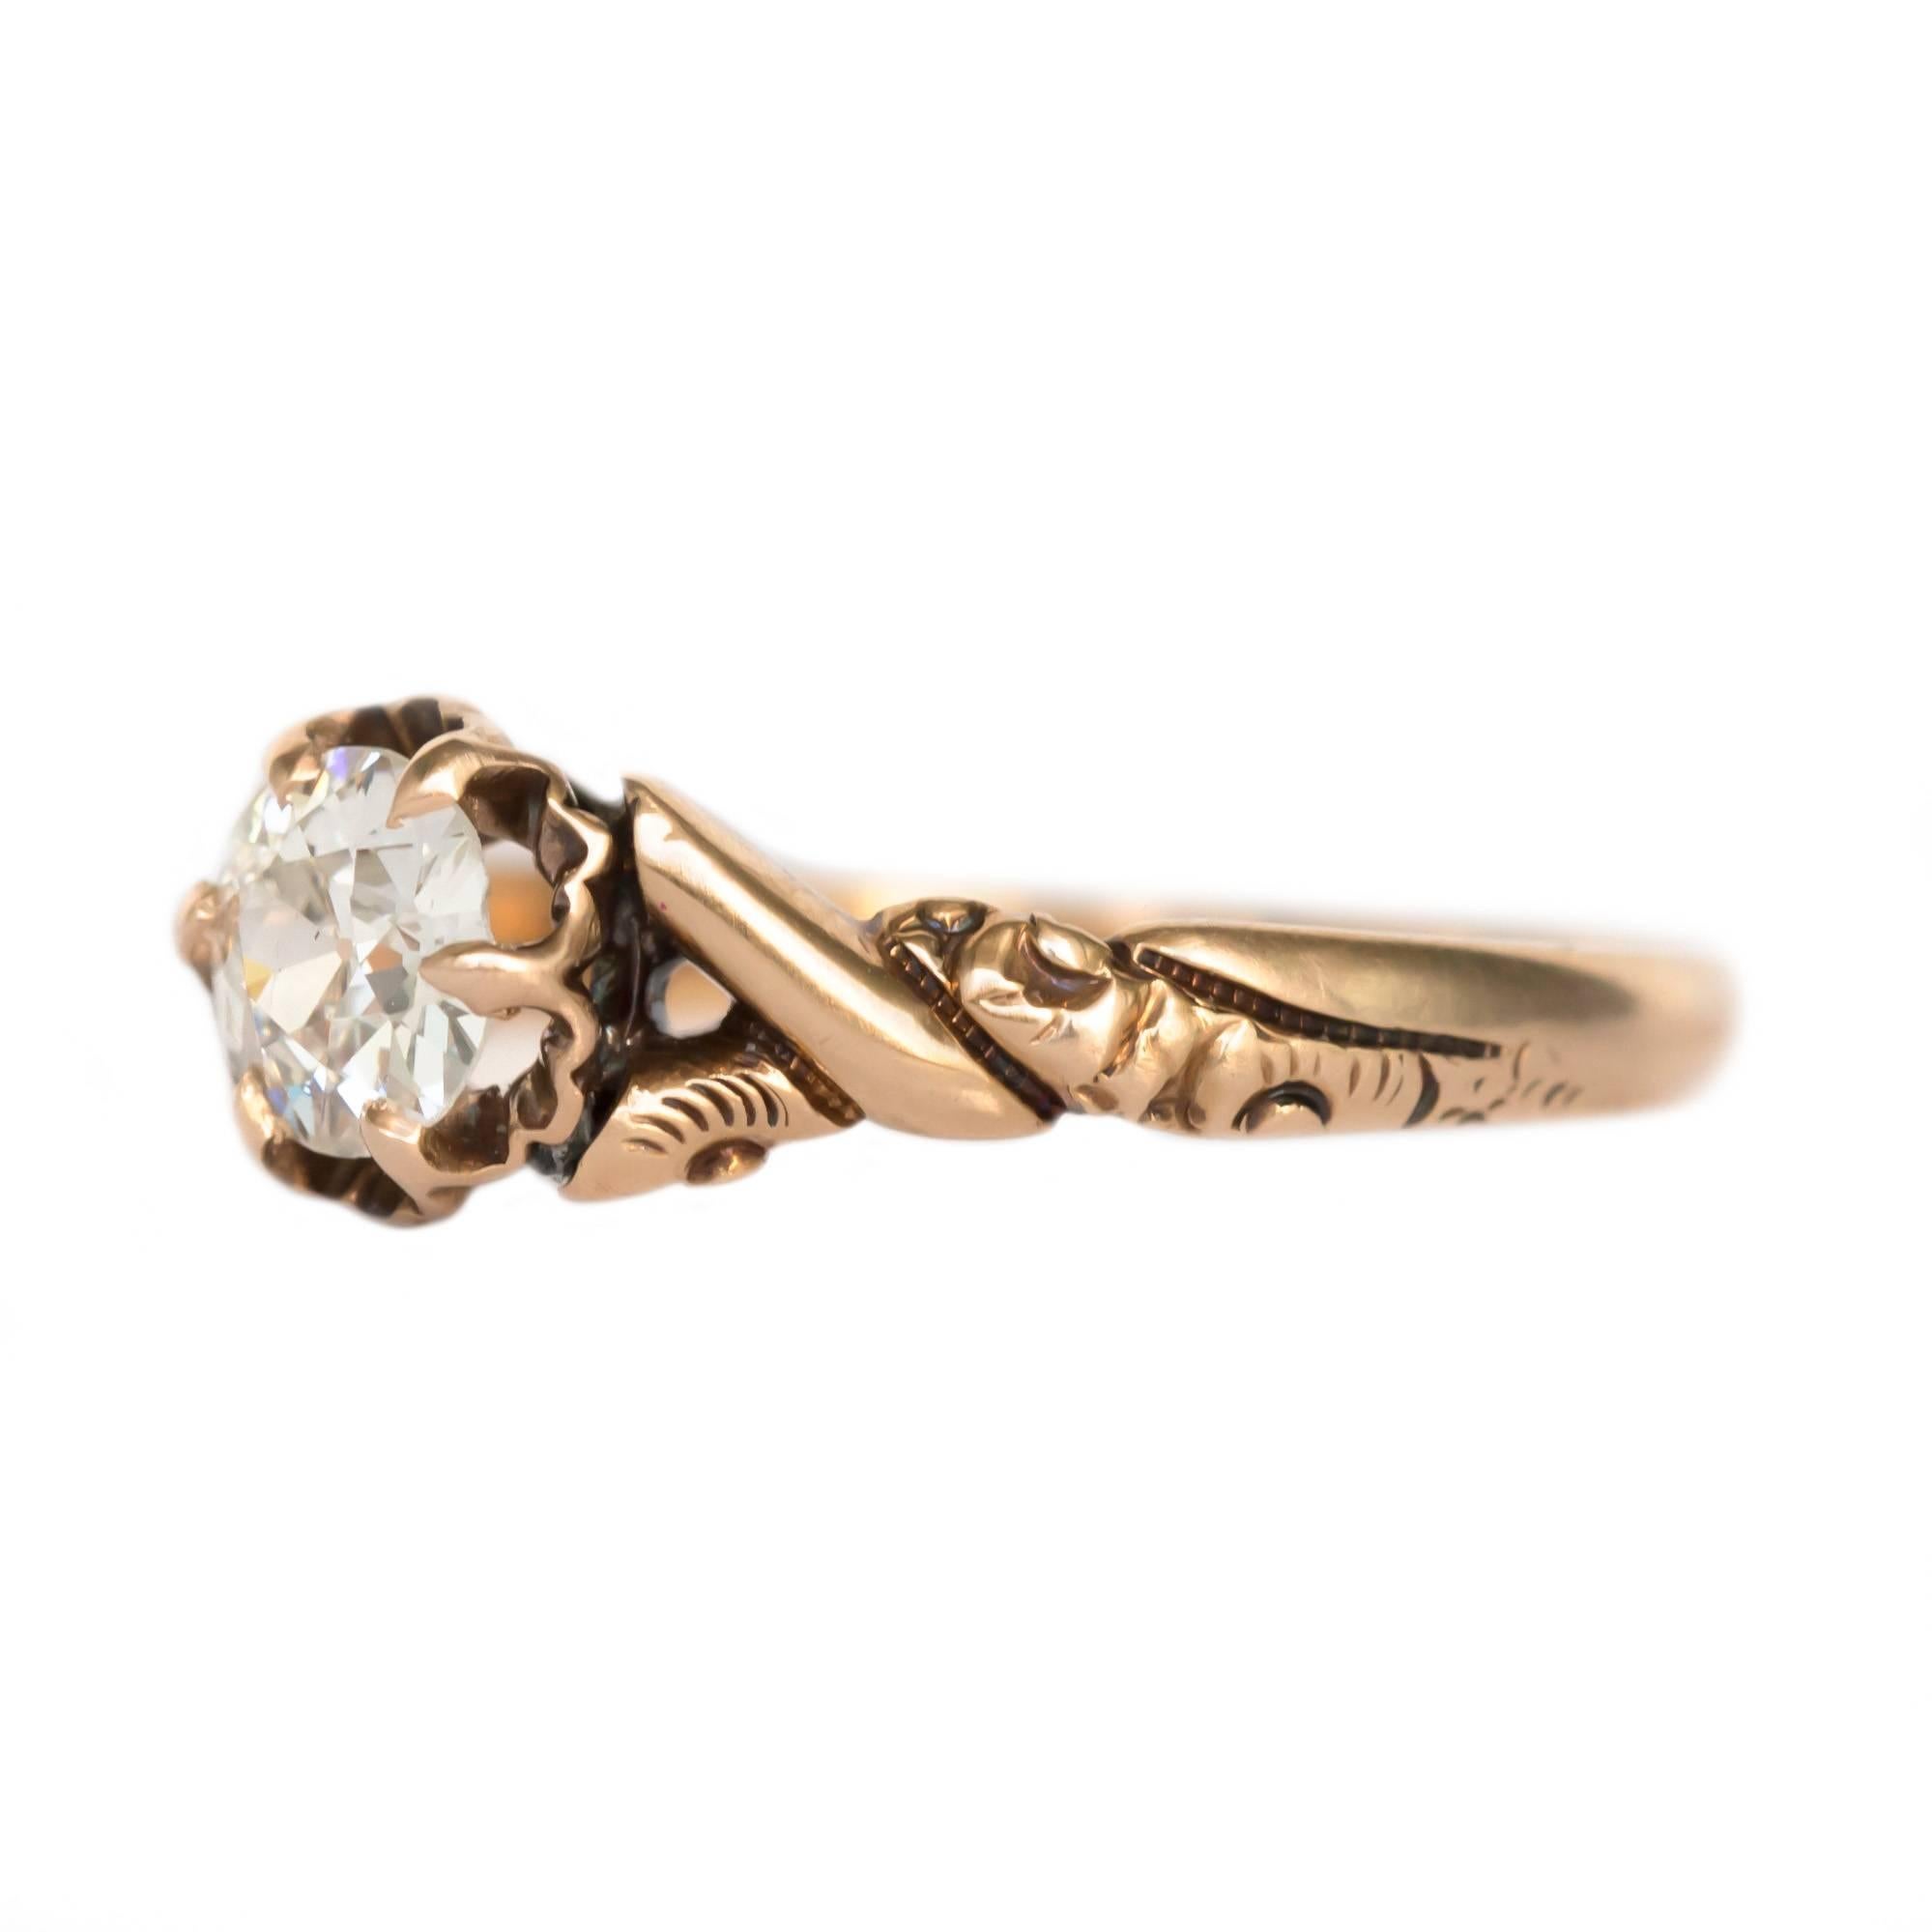 Item Details: 
Ring Size: 5.2
Metal Type: 14 Karat Yellow Gold 
Weight: 1.5 grams

Center Diamond Details
Shape: old European Brilliant 
Carat Weight: .40 carat
Color: I
Clarity: VS1

Finger to Top of Stone Measurement: 4.20mm